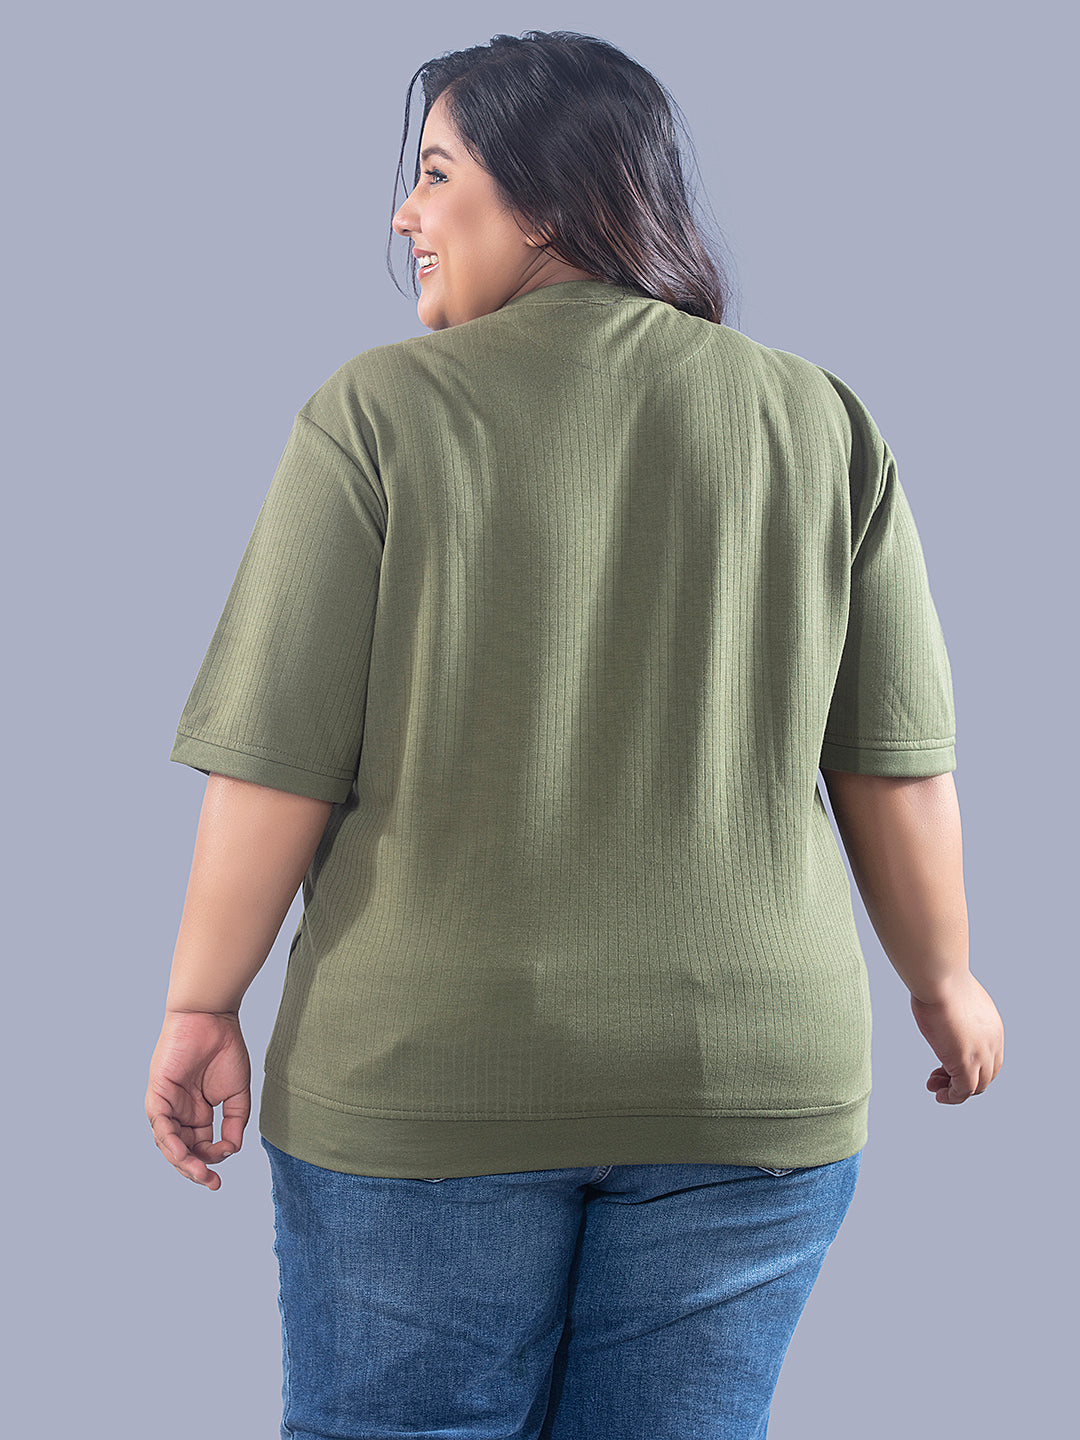 Plus Size Cotton Street Style T-shirts For Summer - Olive Green